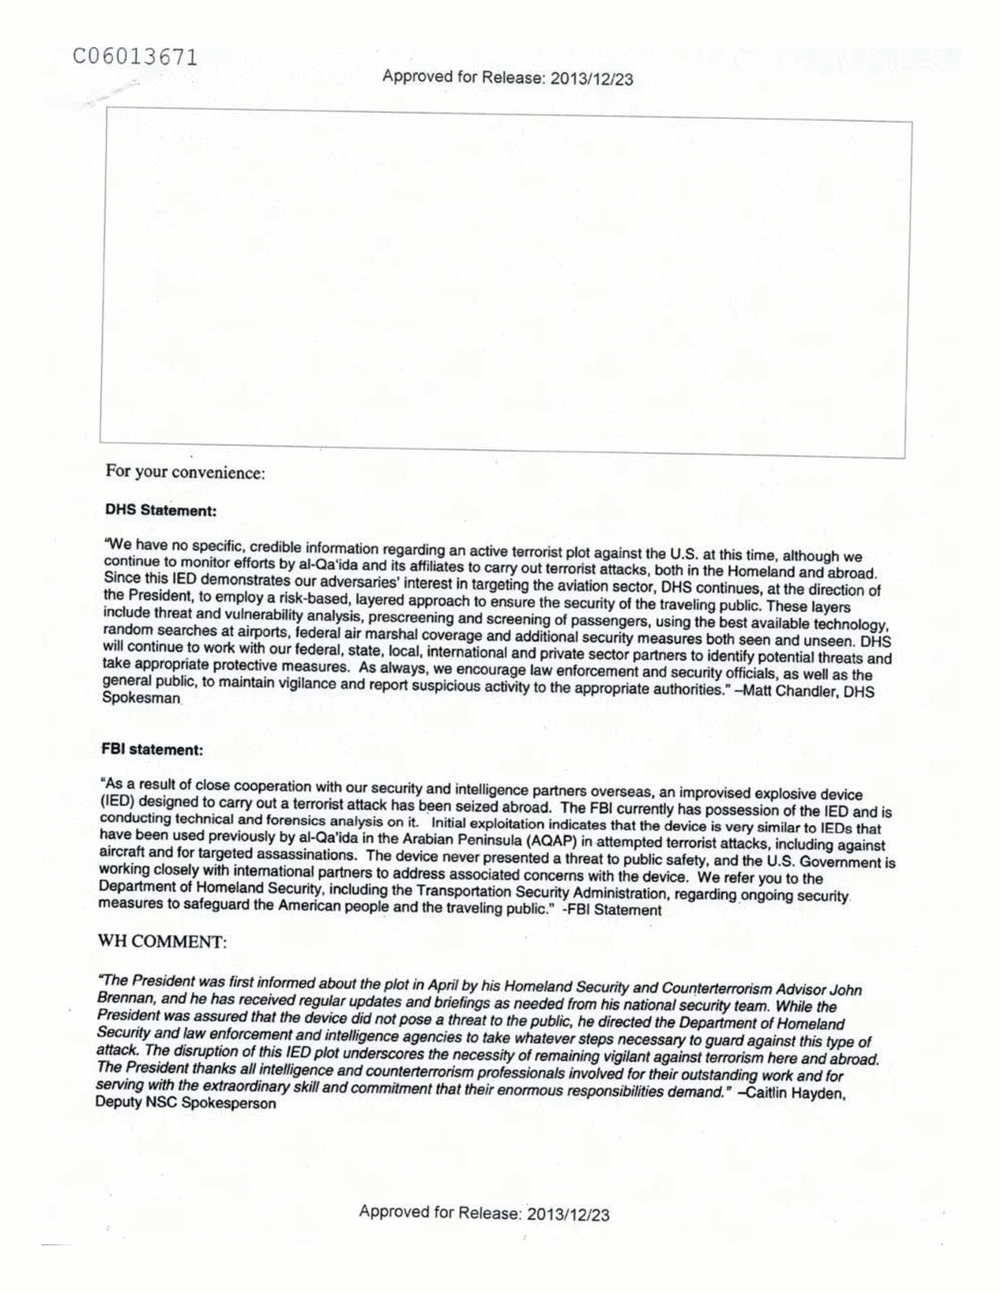 Page 522 from Email Correspondence Between Reporters and CIA Flacks